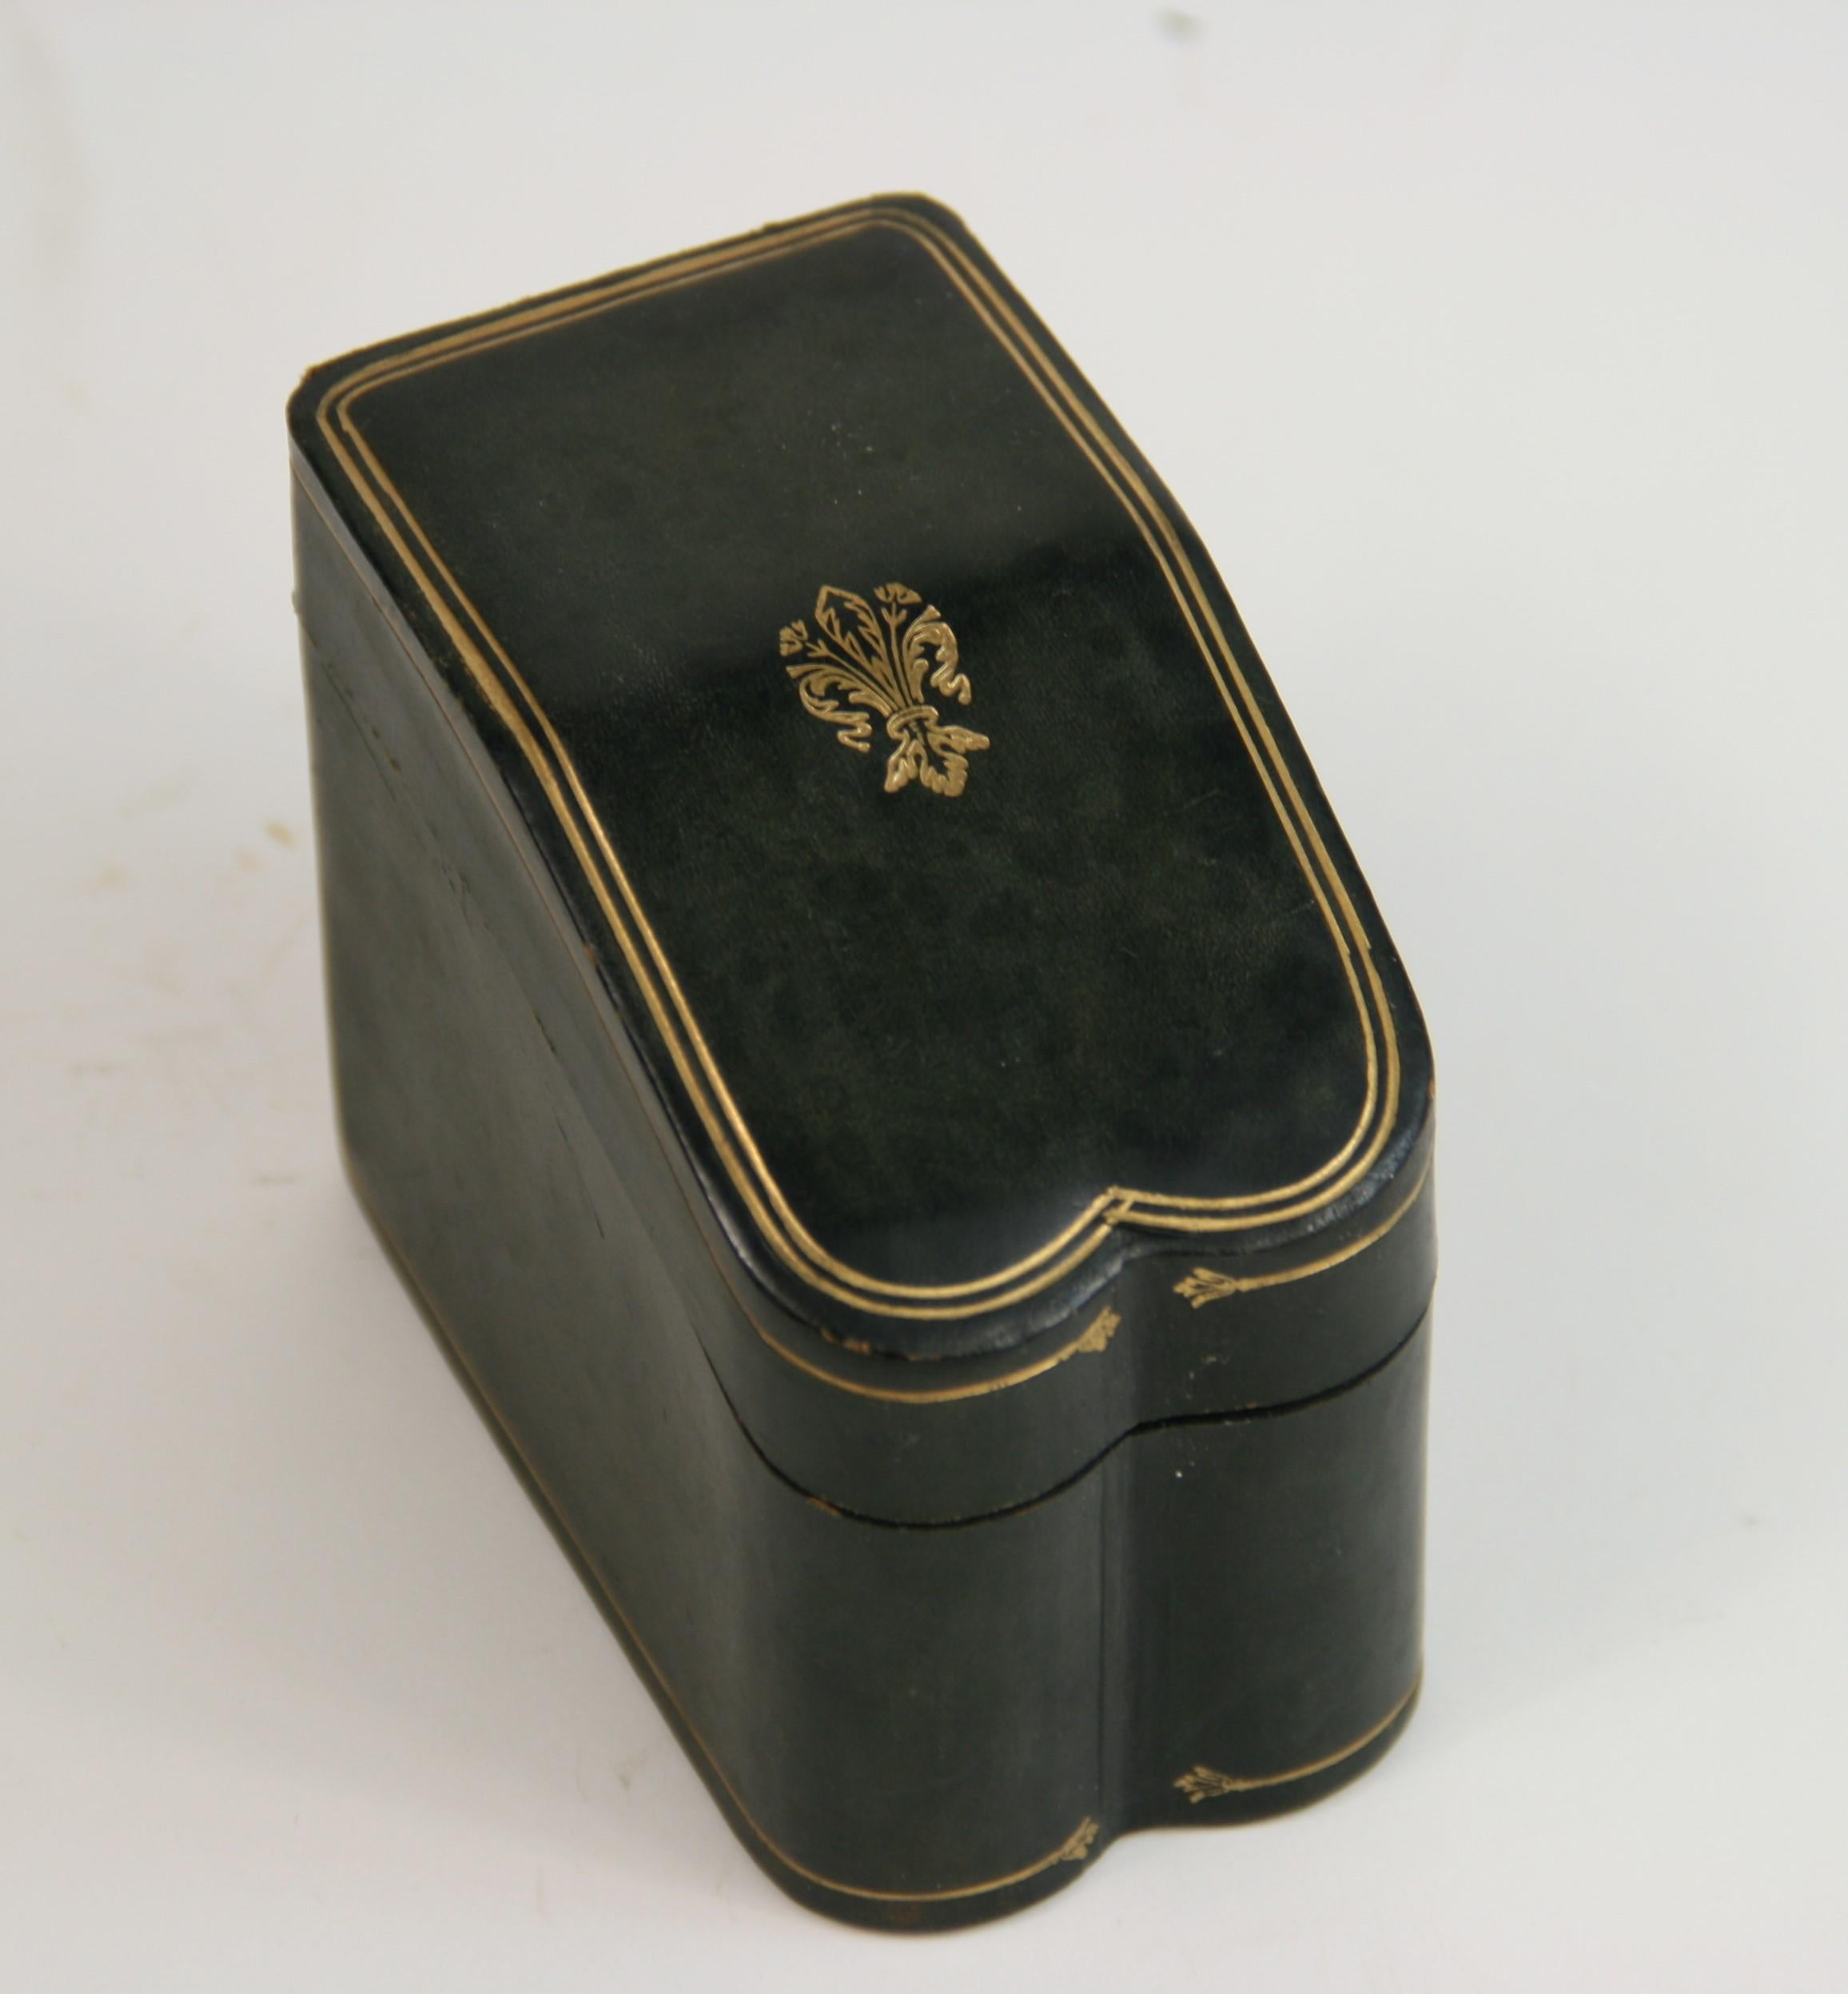 2-292 Italian leather 2 deck of card box. Genuine dark green or black leather with gold details.